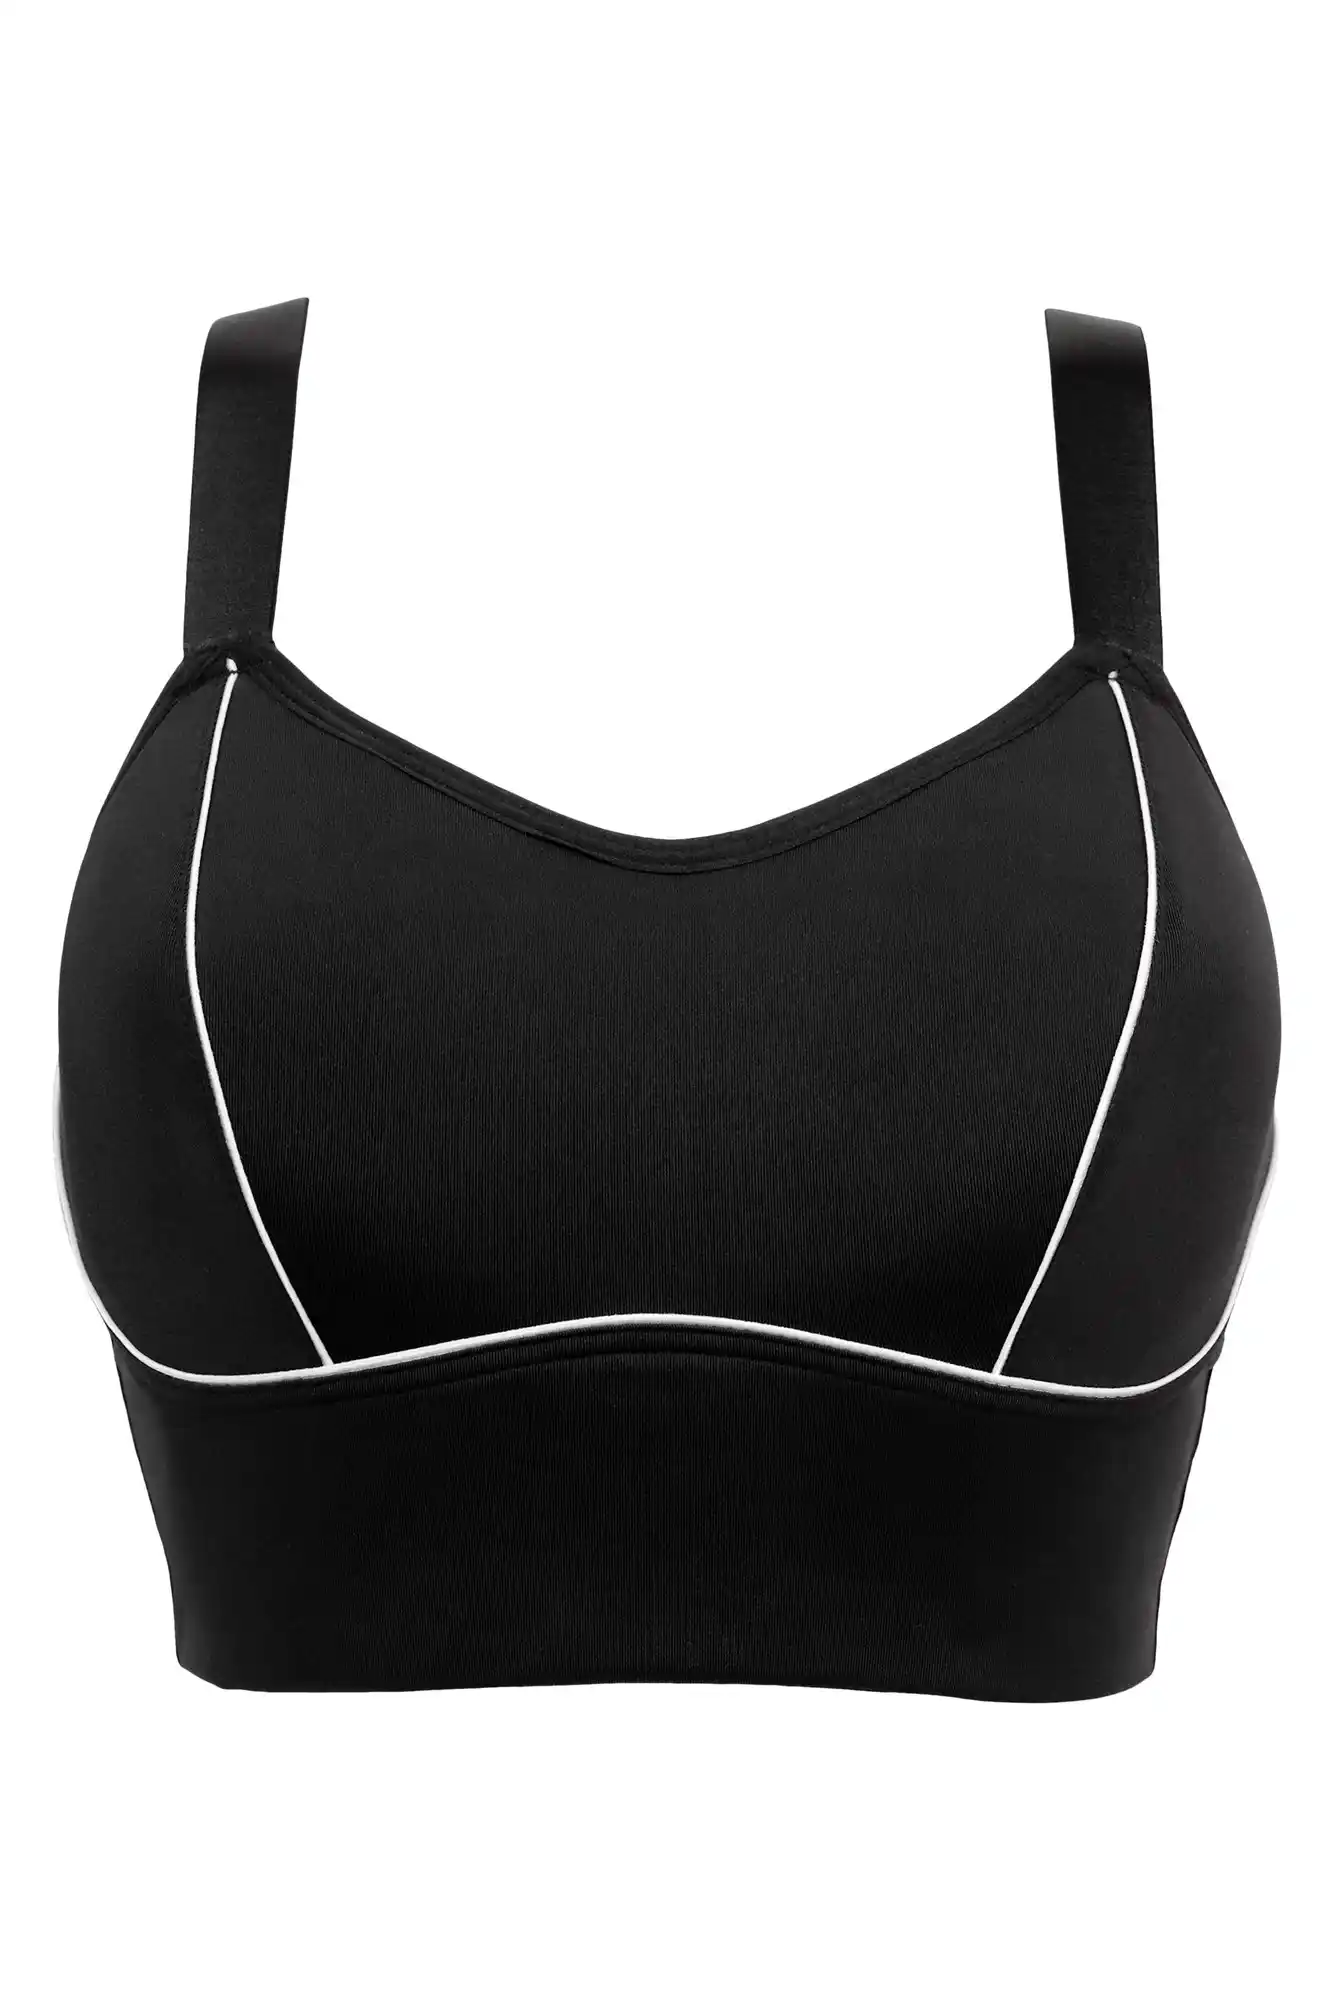 Pour Moi Fuller Bust Energy lightly padded underwired sports bra in berry